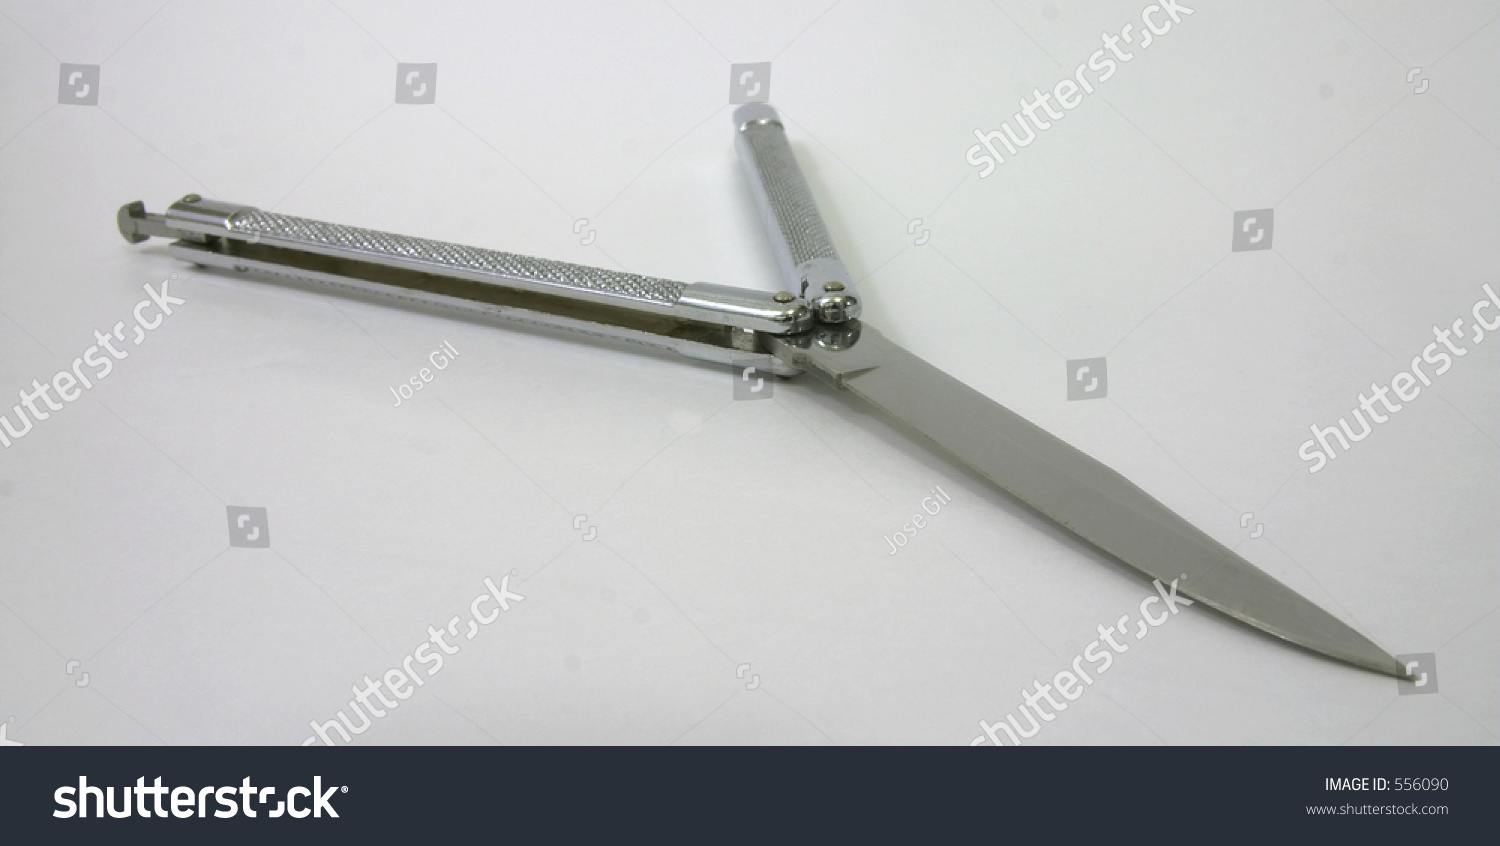 Steel Butterfly Knife (Balisong) On White Background, Partially Opened